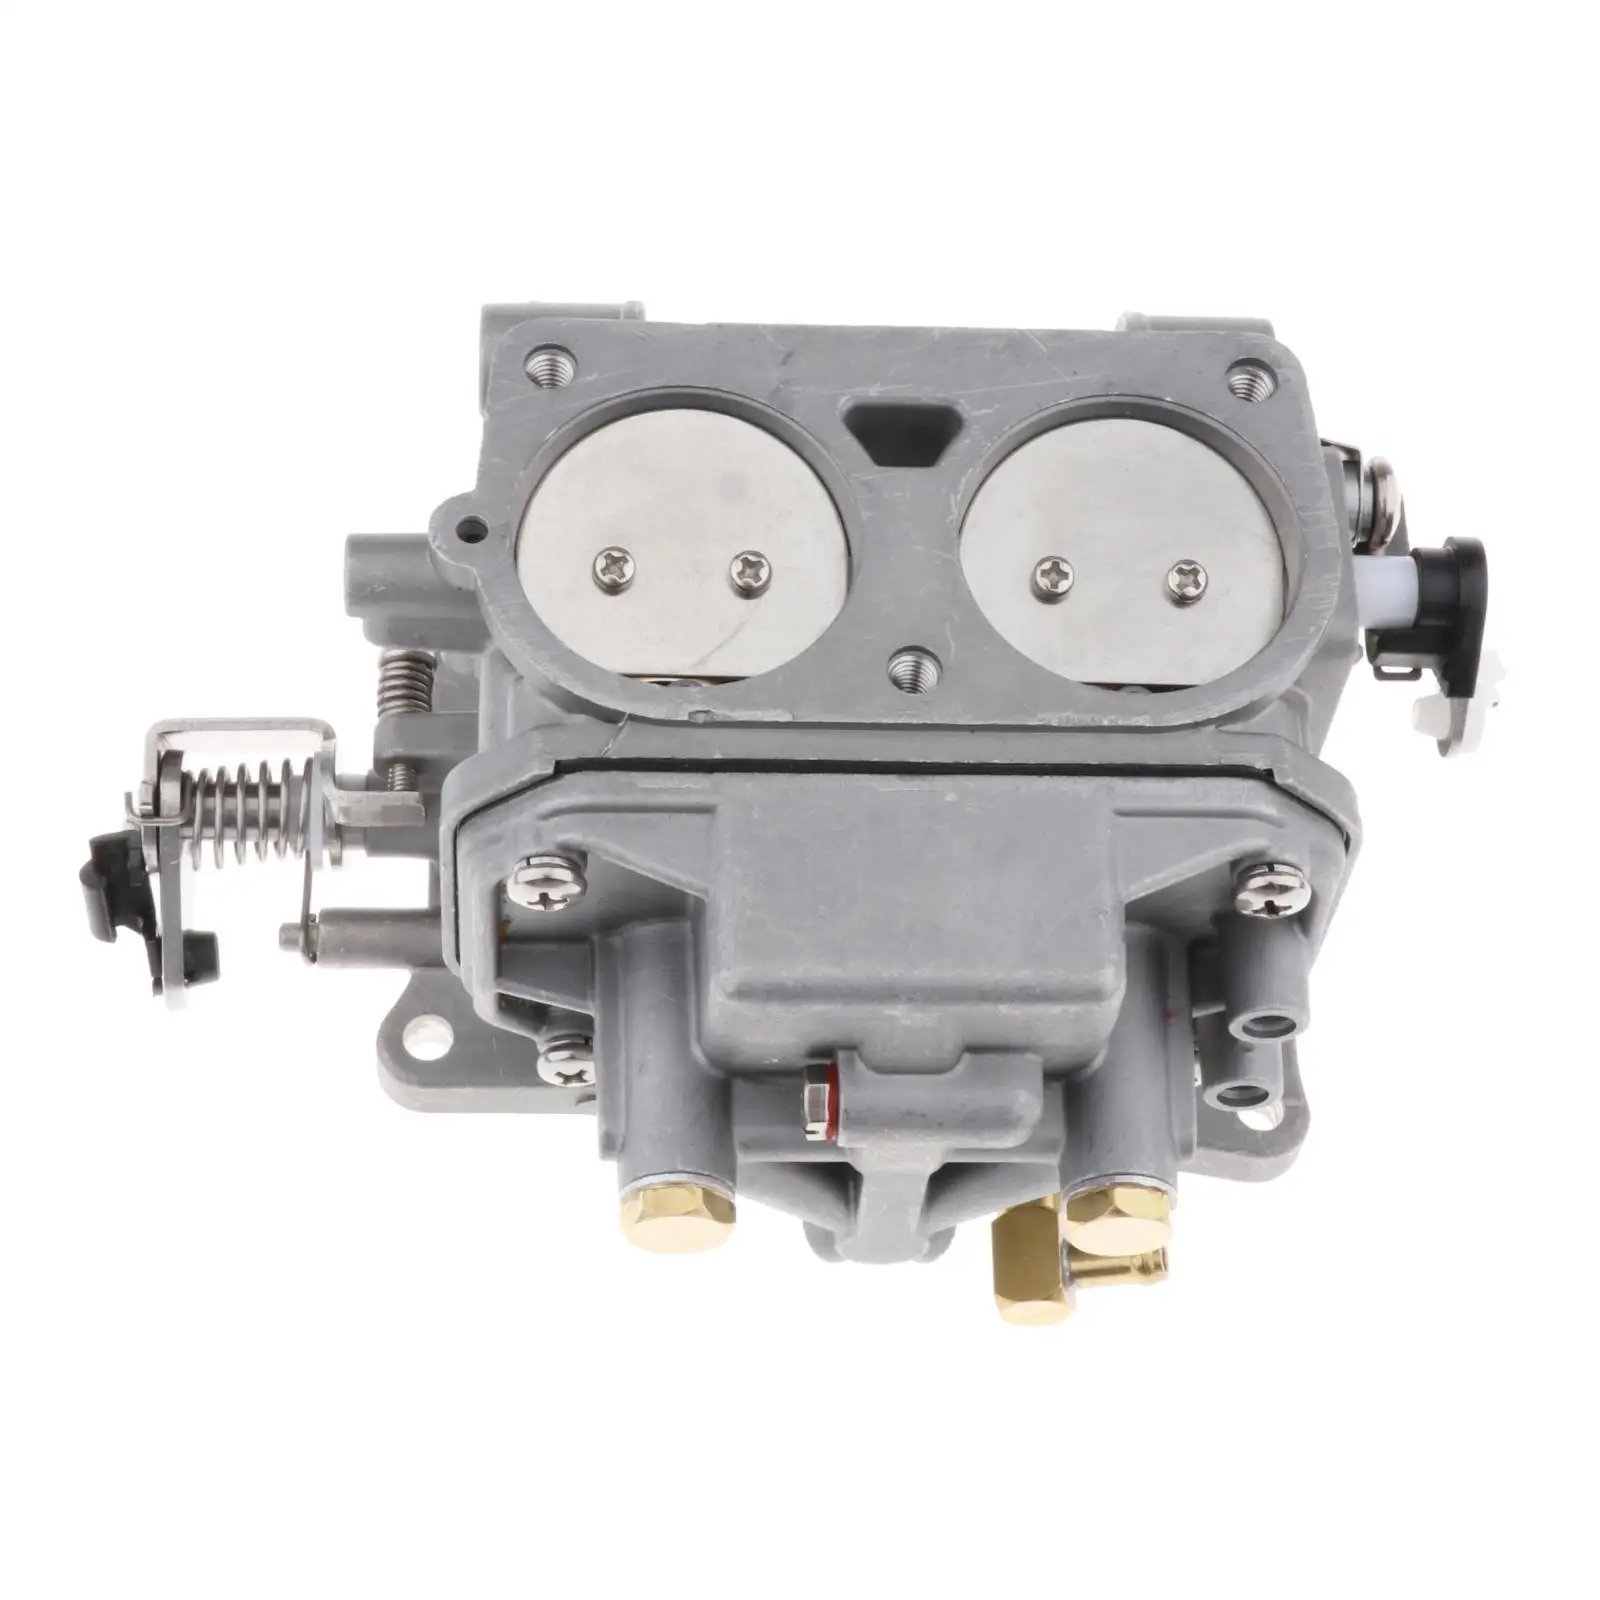 Boat Motor Carburetor Carb Assy For Yamaha 40HP J 1986-1993 For Chinese Parsun T36J T40J 2 Stroke Outboard Engine